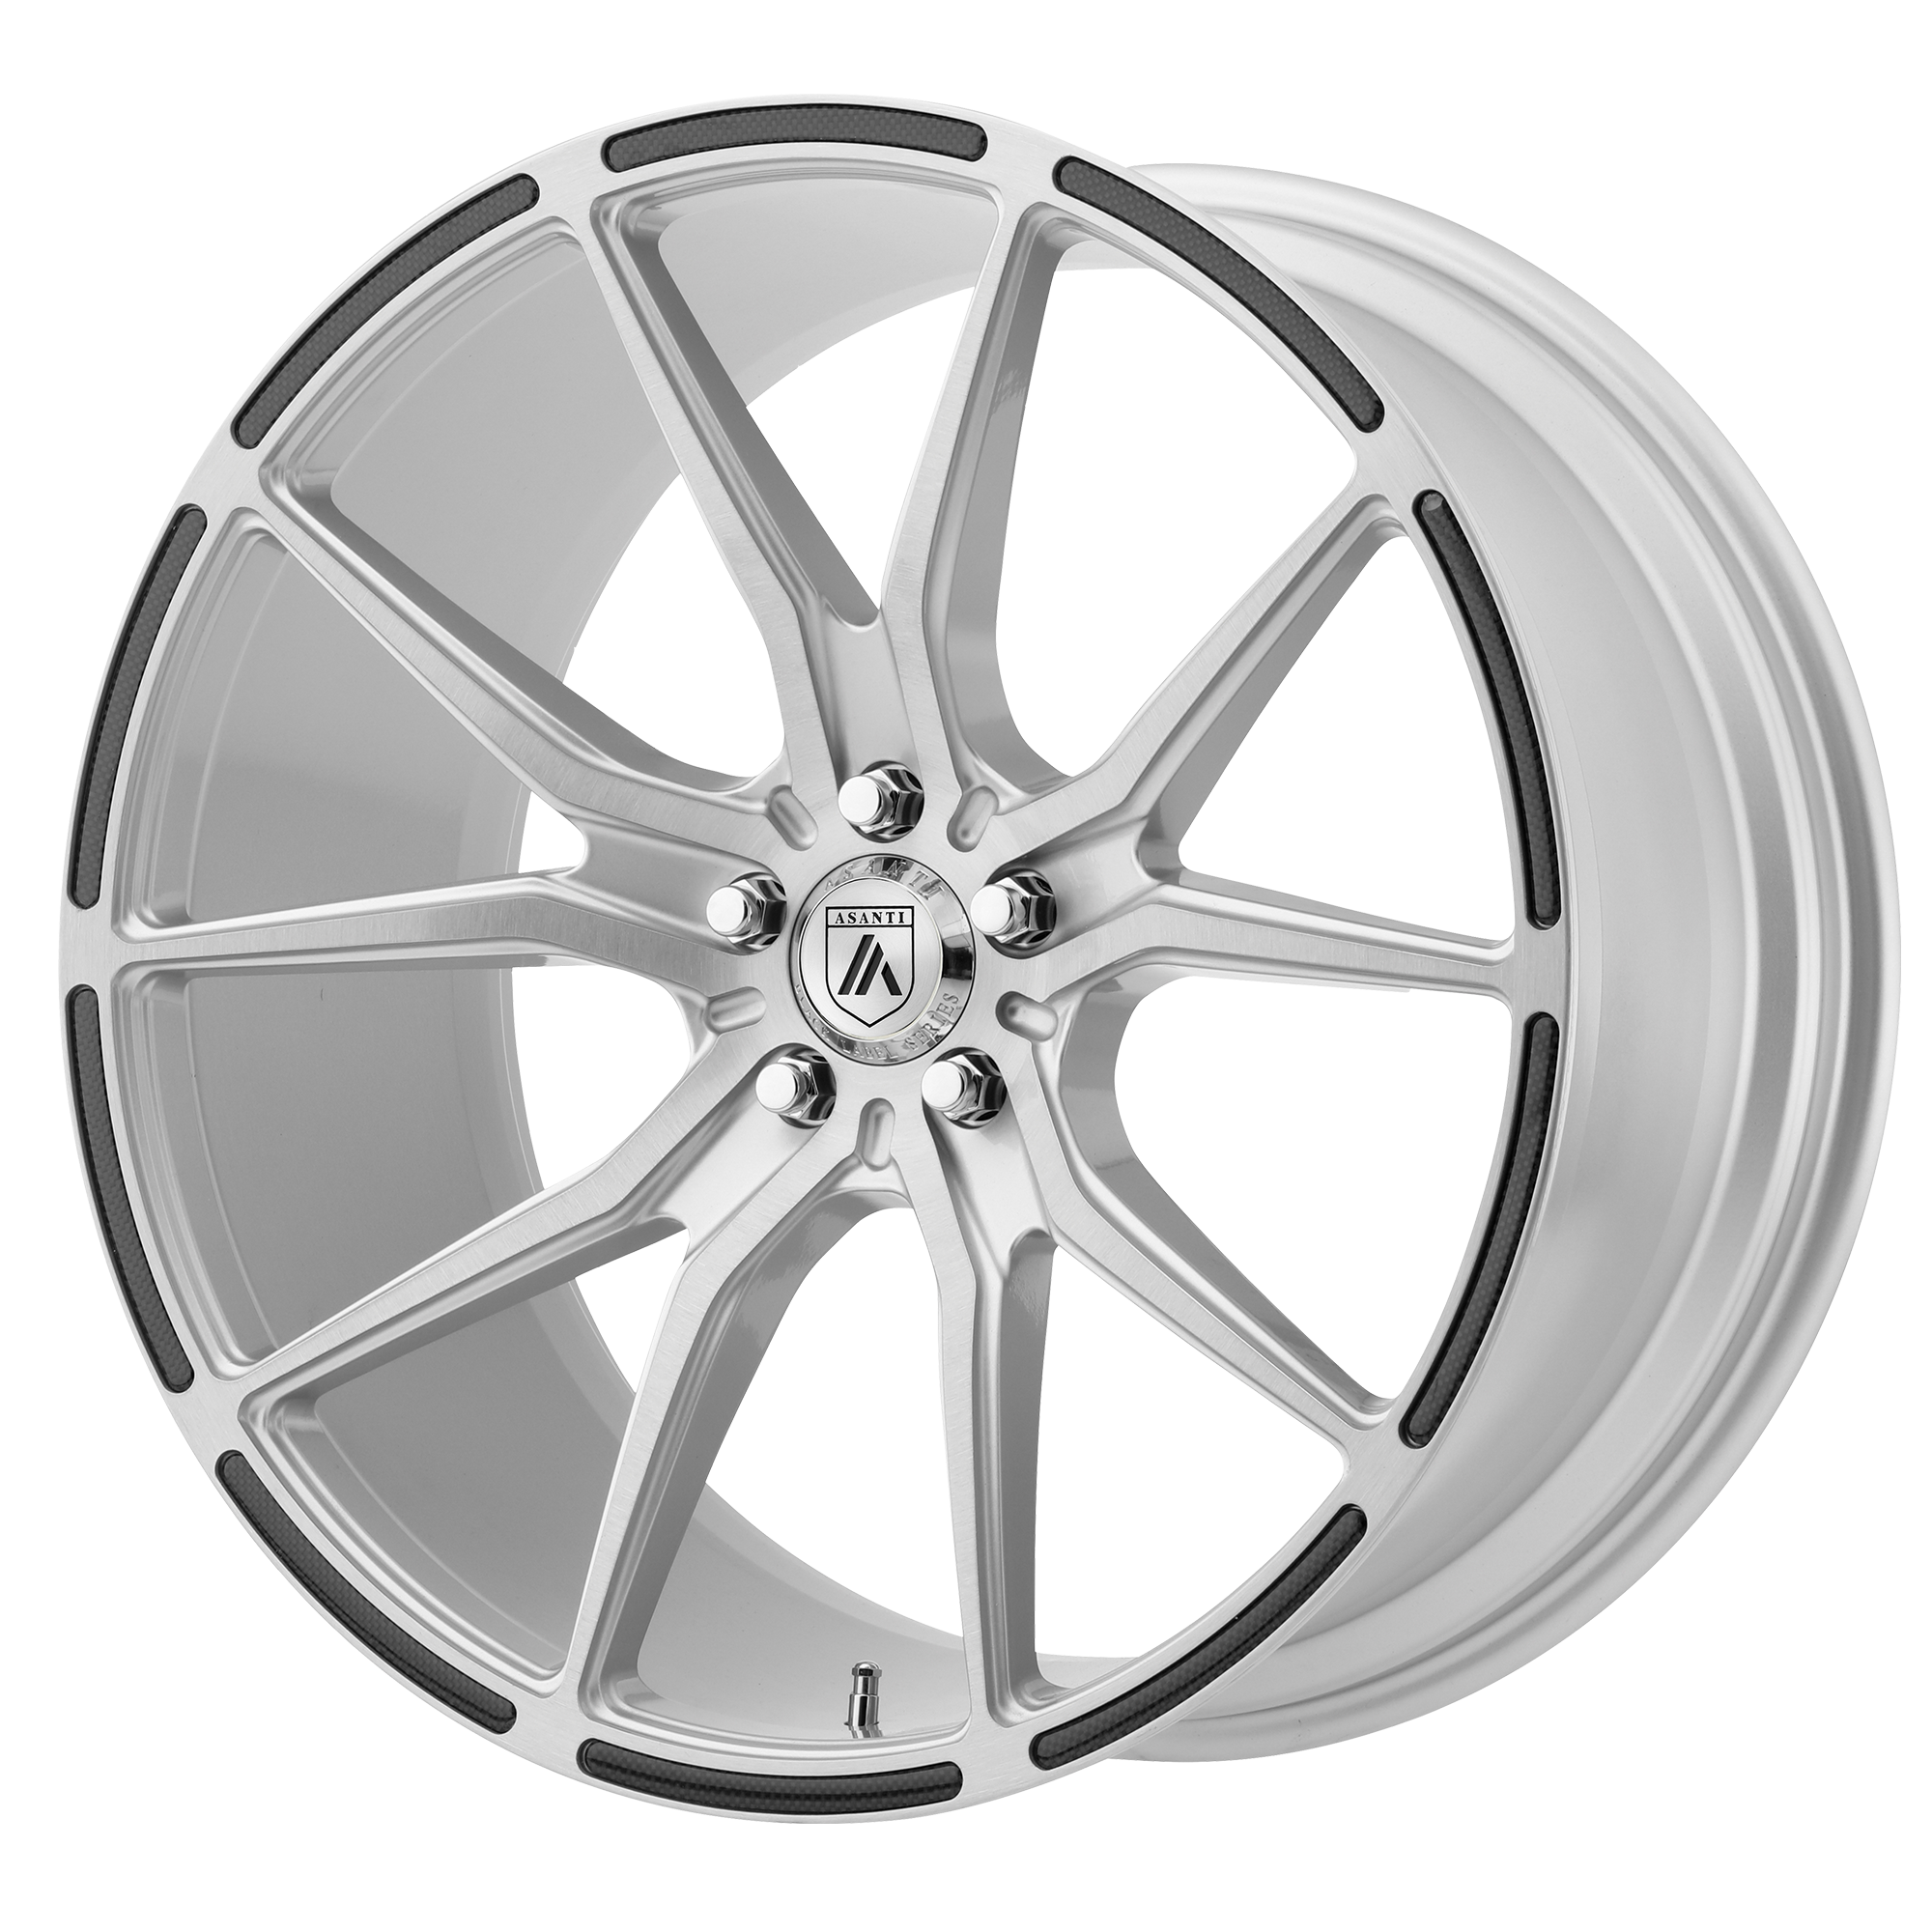 VEGA 20x10.5 Blank BRUSHED SILVER W/ CARBON FIBER INSERTS (38.00 - 45.00 mm) - Tires and Engine Performance